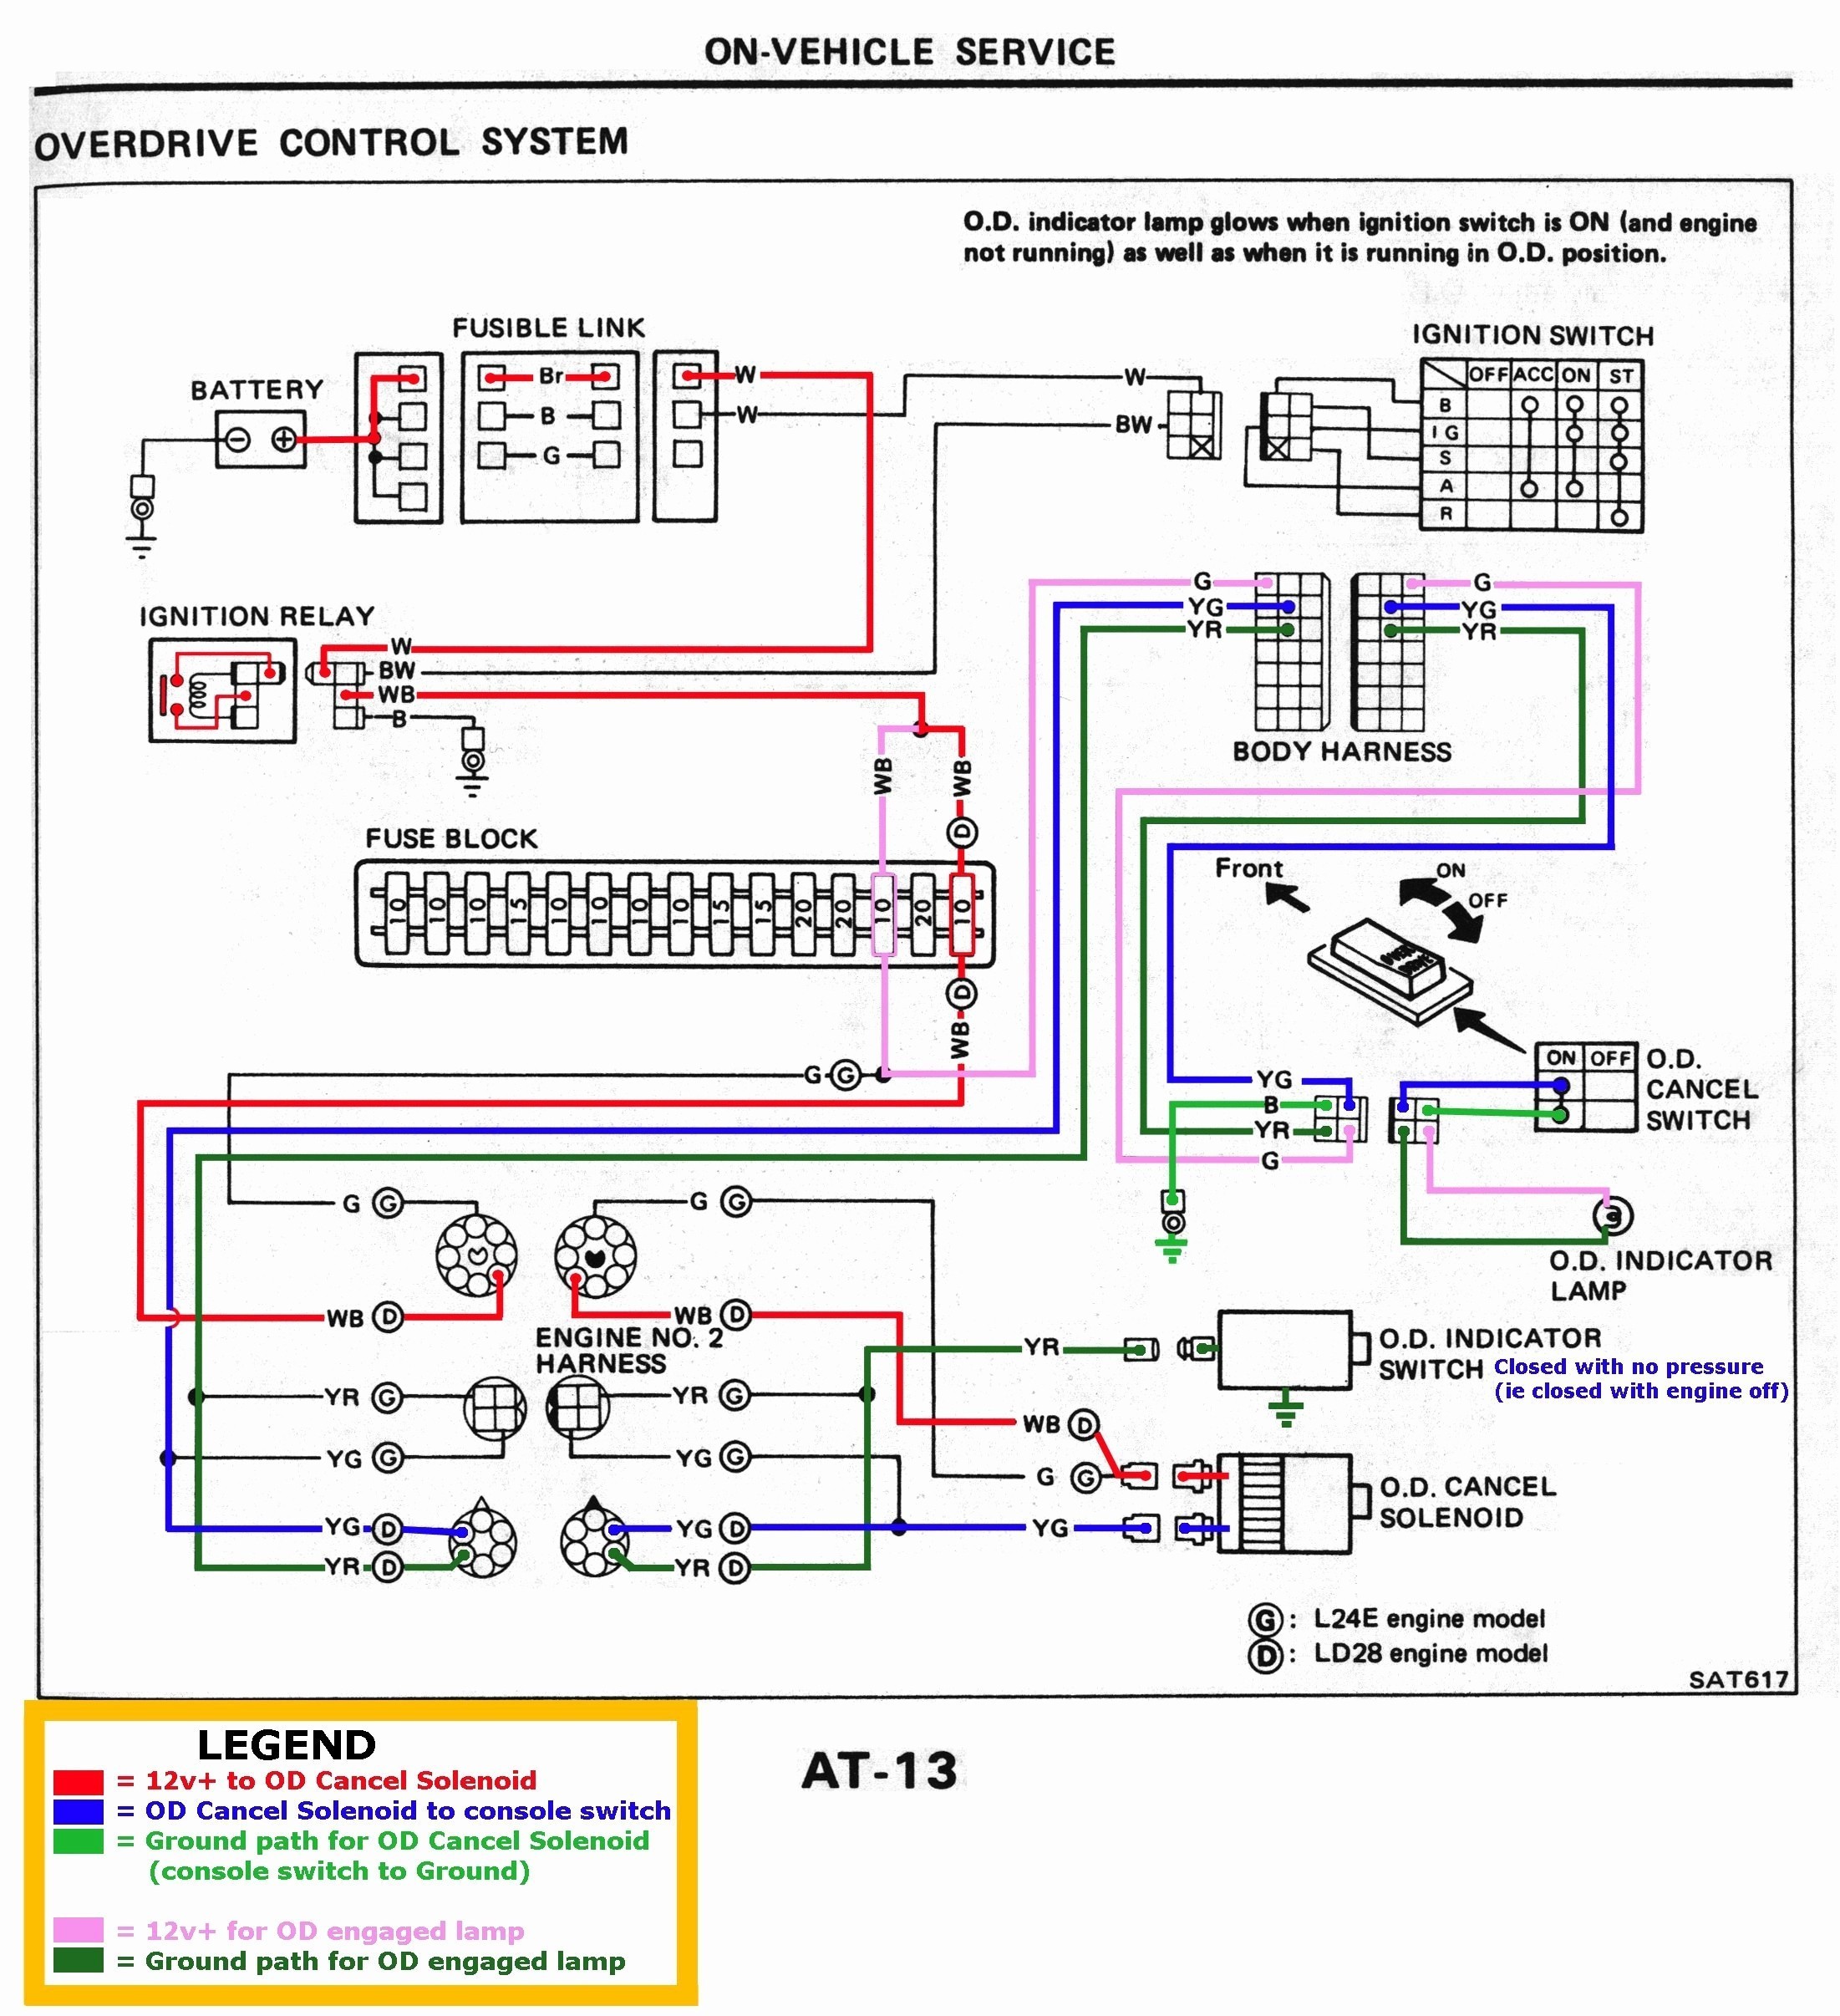 Car Relay Wiring Diagram Awesome Rib Relay Wiring Diagram • Electrical Outlet Symbol 2018 Of Car Relay Wiring Diagram